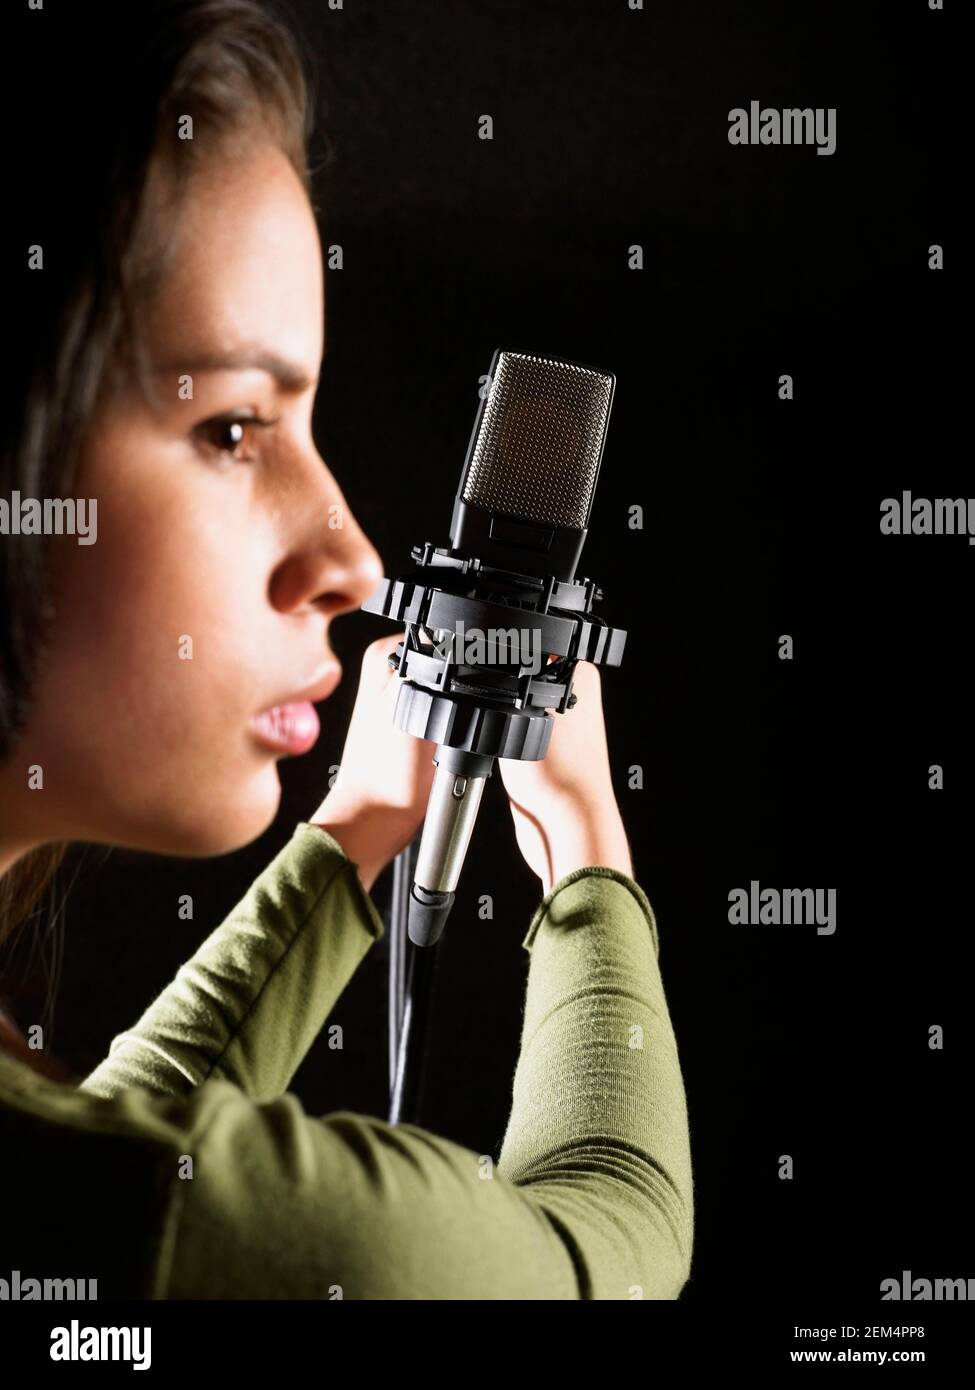 Close-up of a young woman holding a microphone Stock Photo